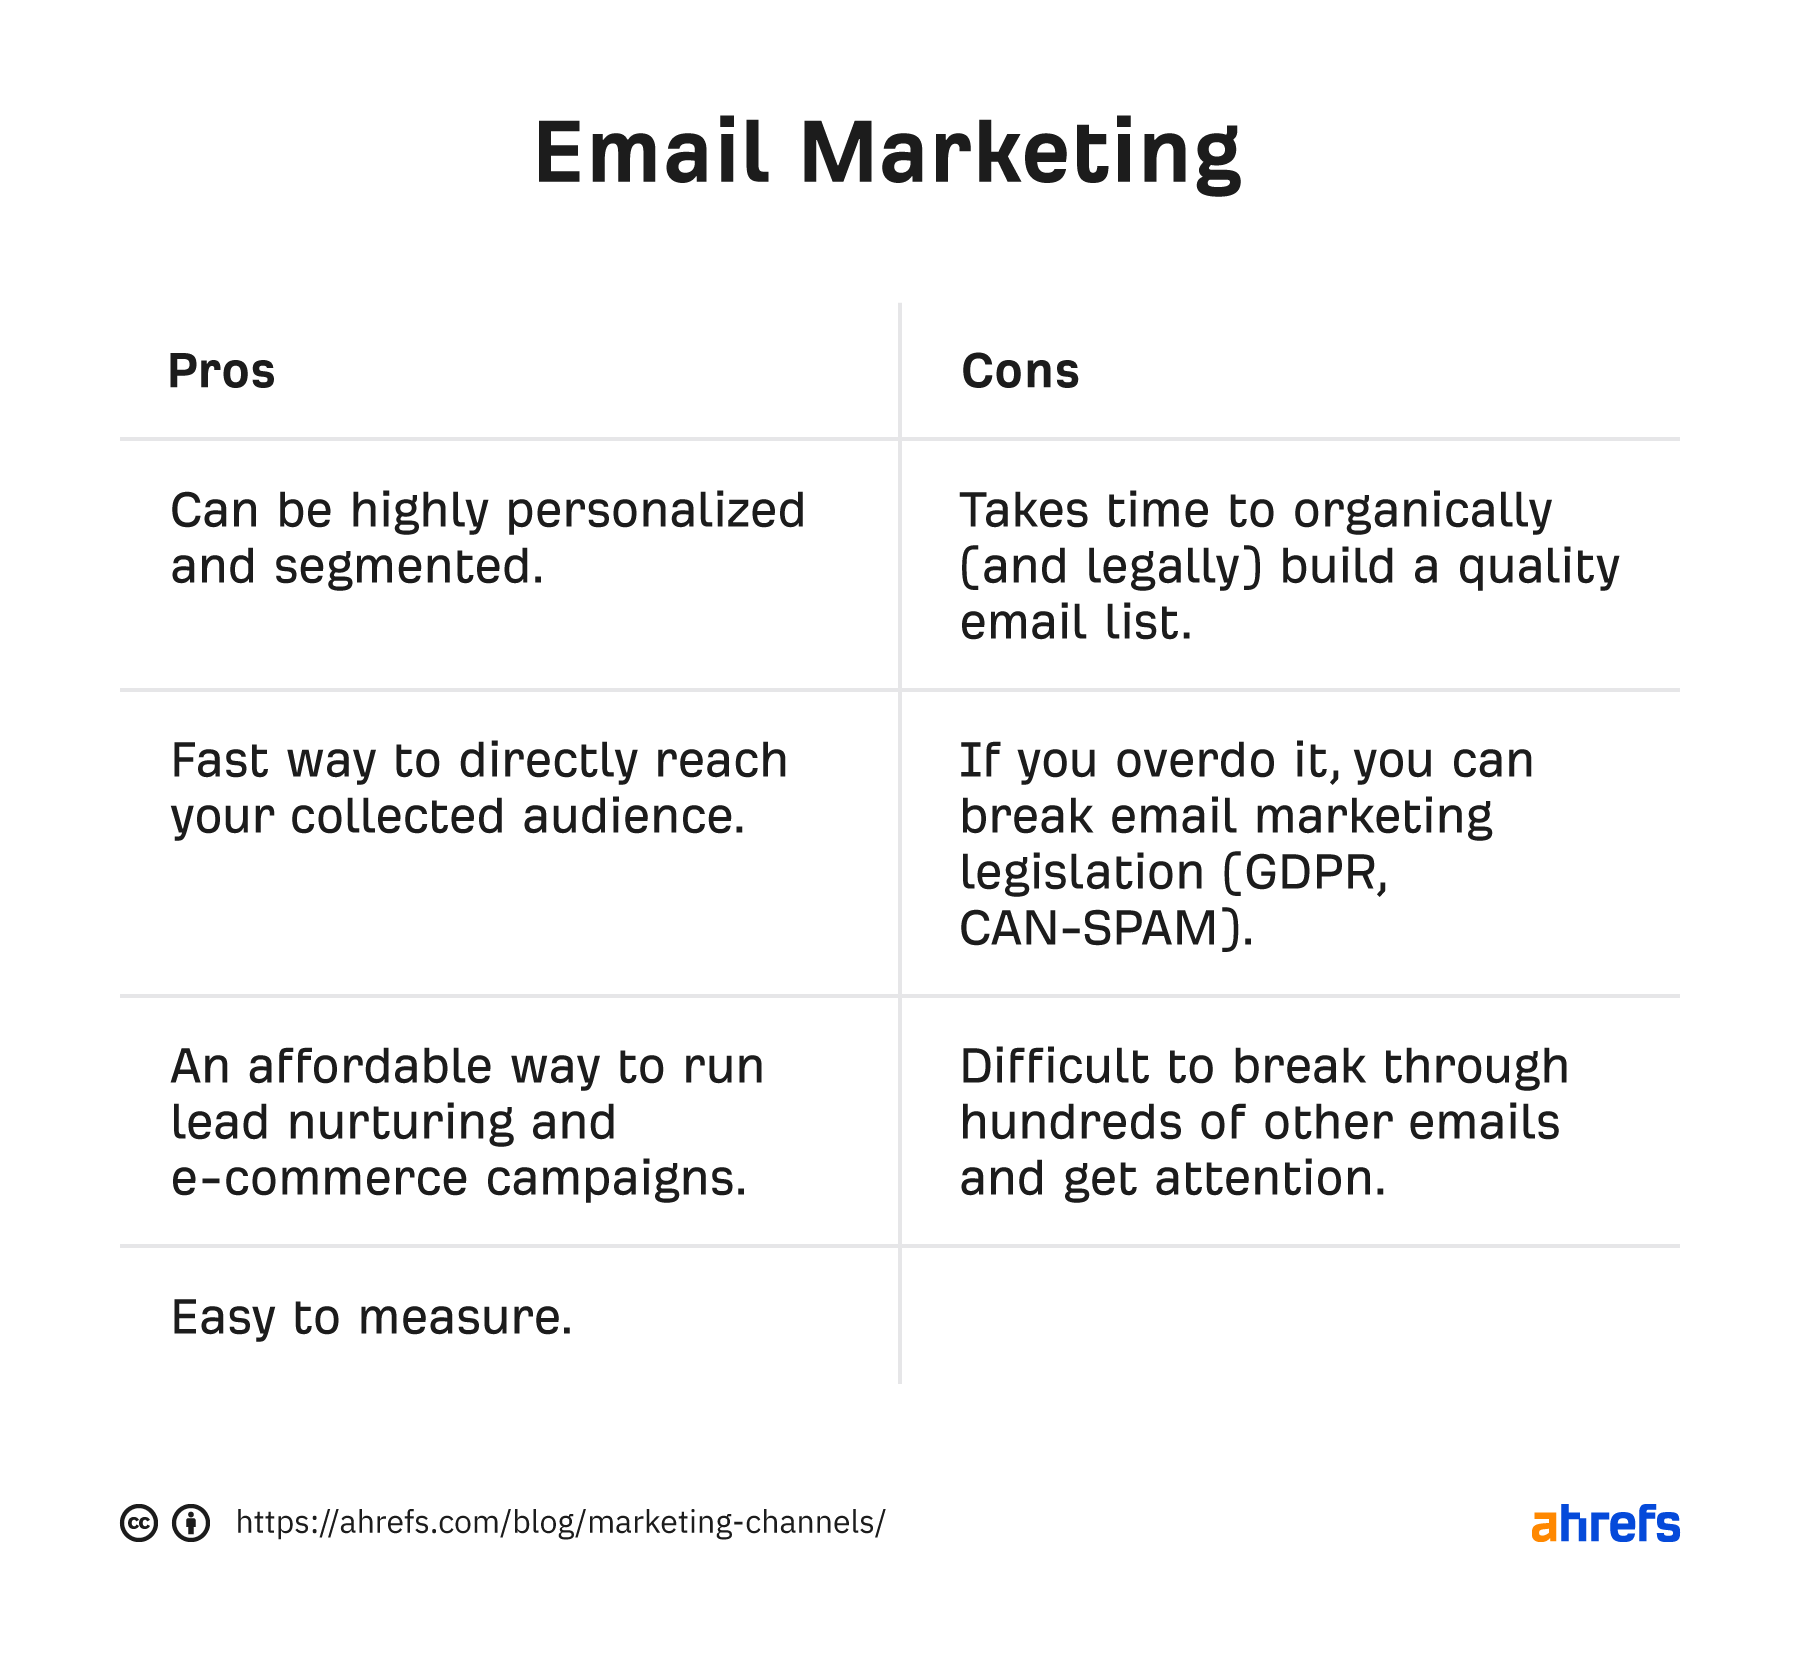 Pros and cons of email marketing